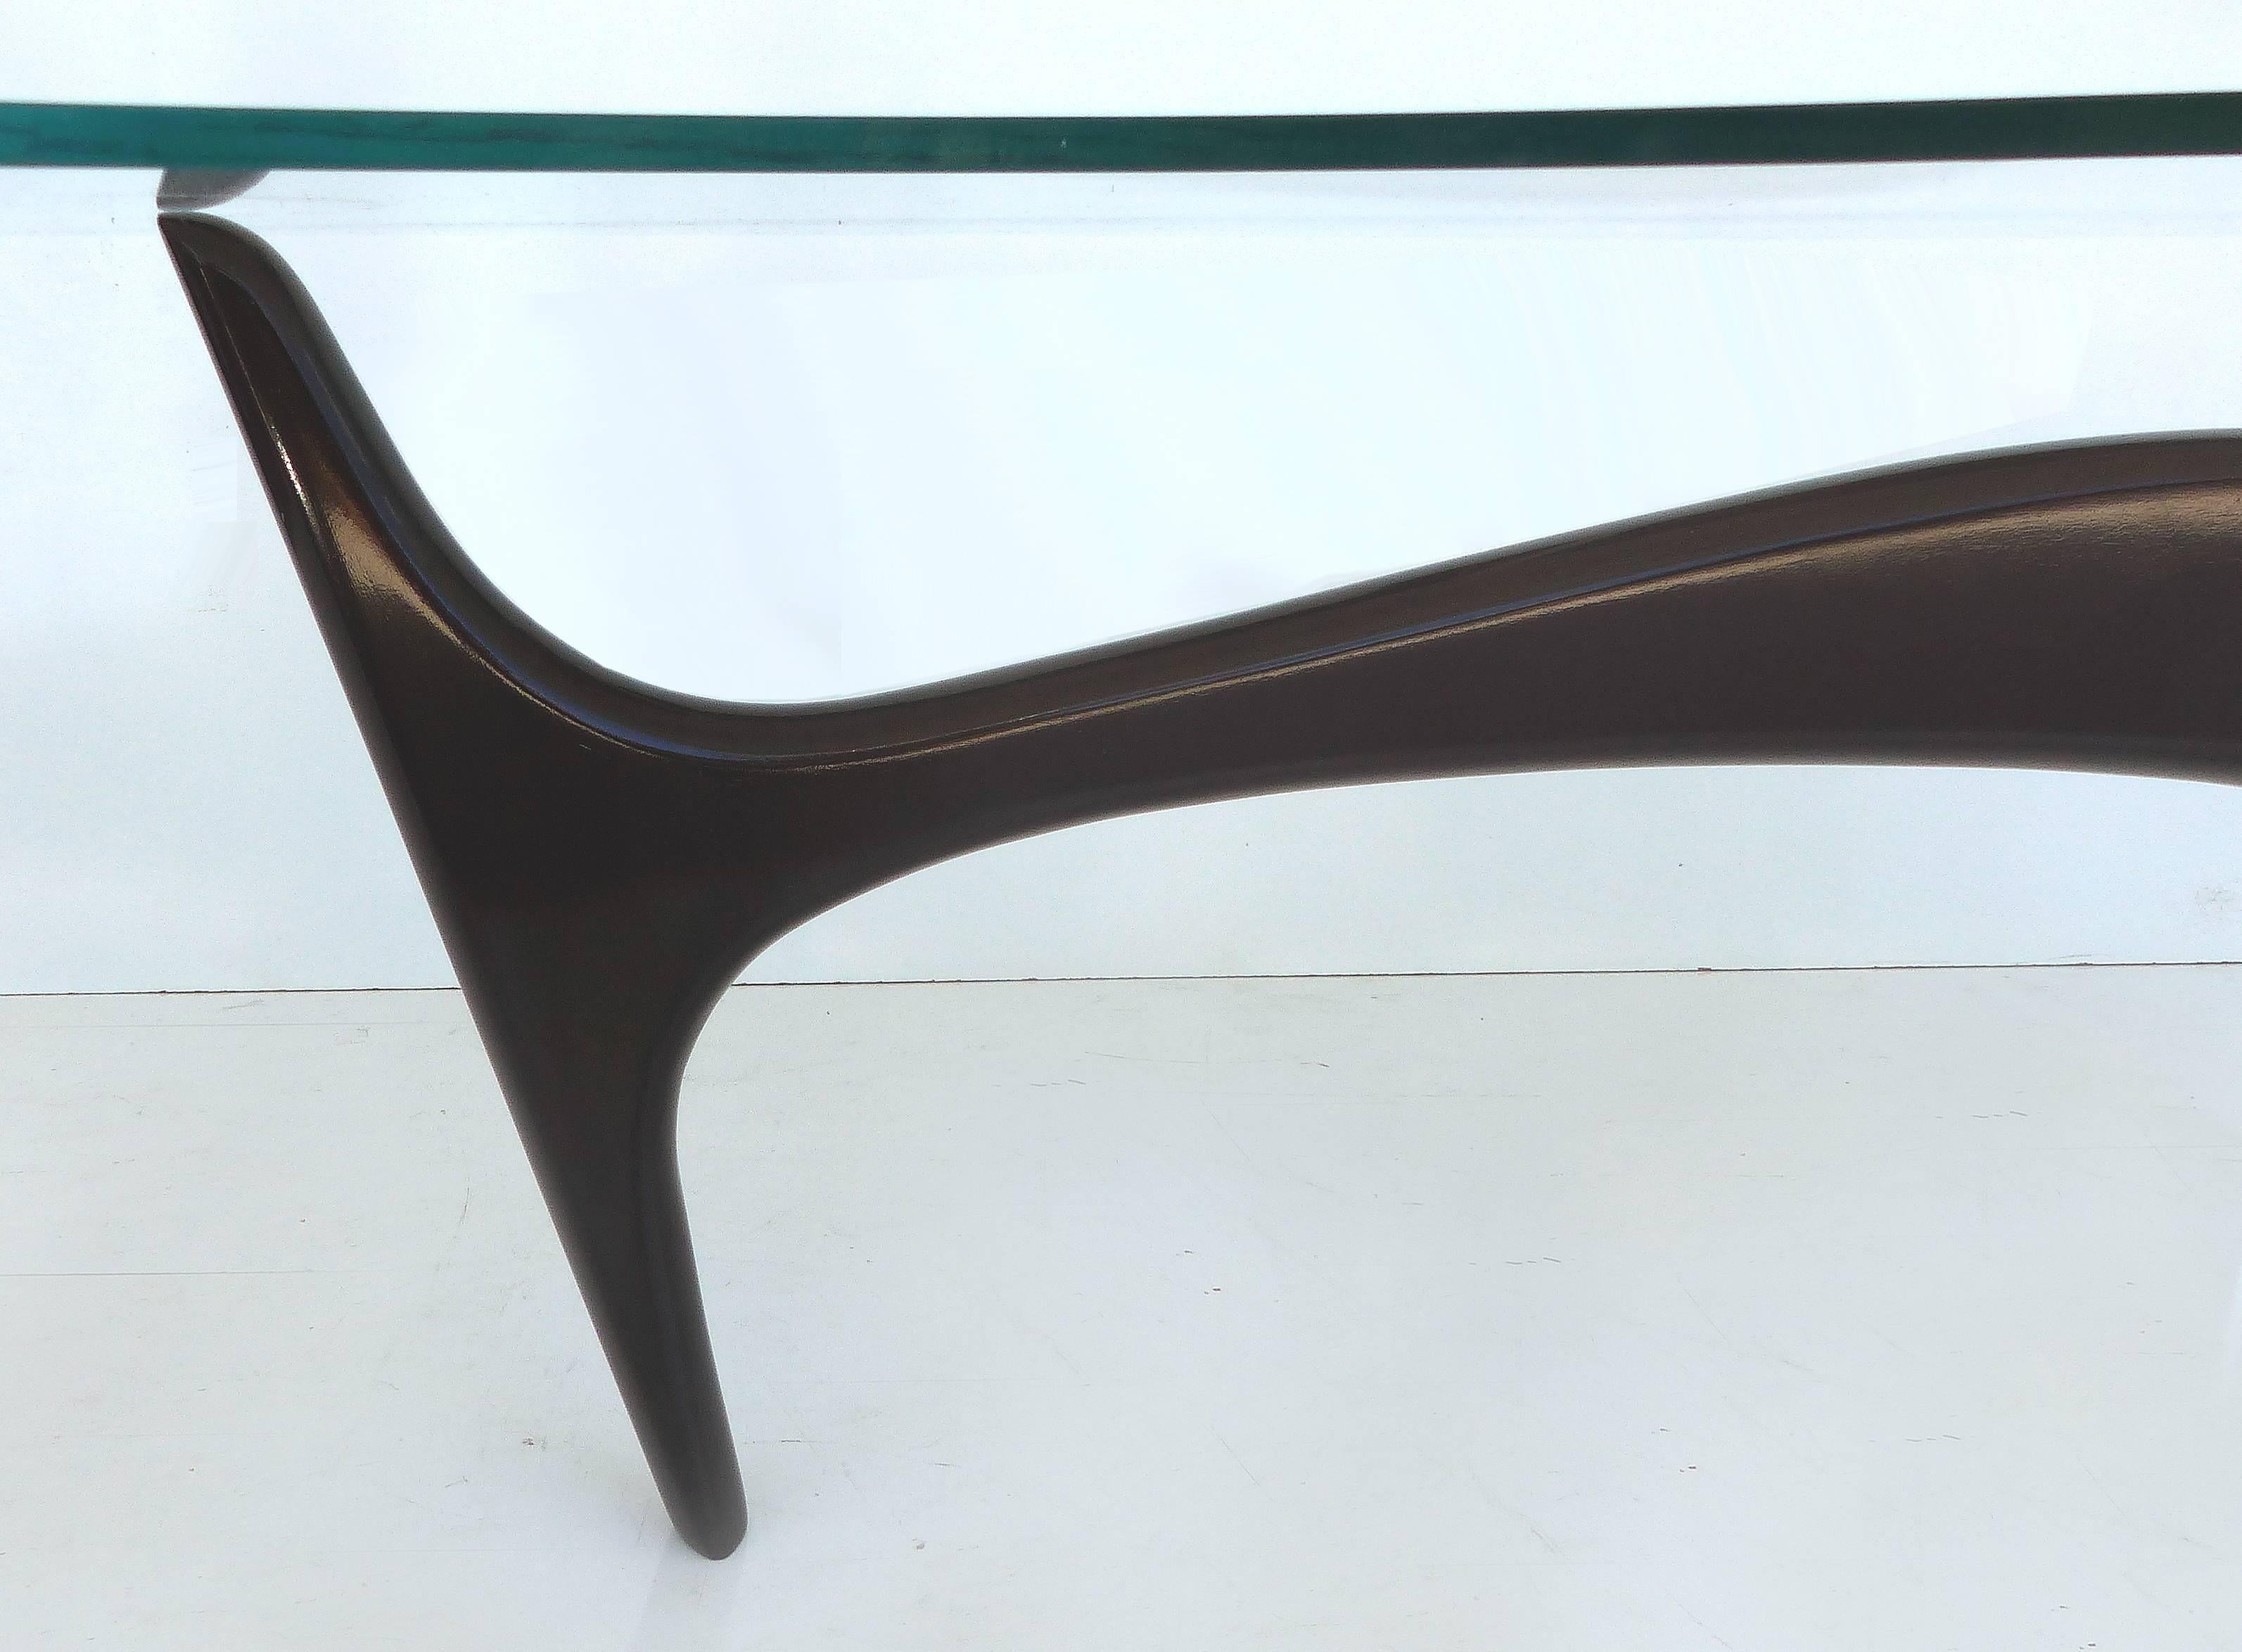 20th Century Mid-Century Modern Coffee Table in the Manner of the Kagan Omnibus Collection